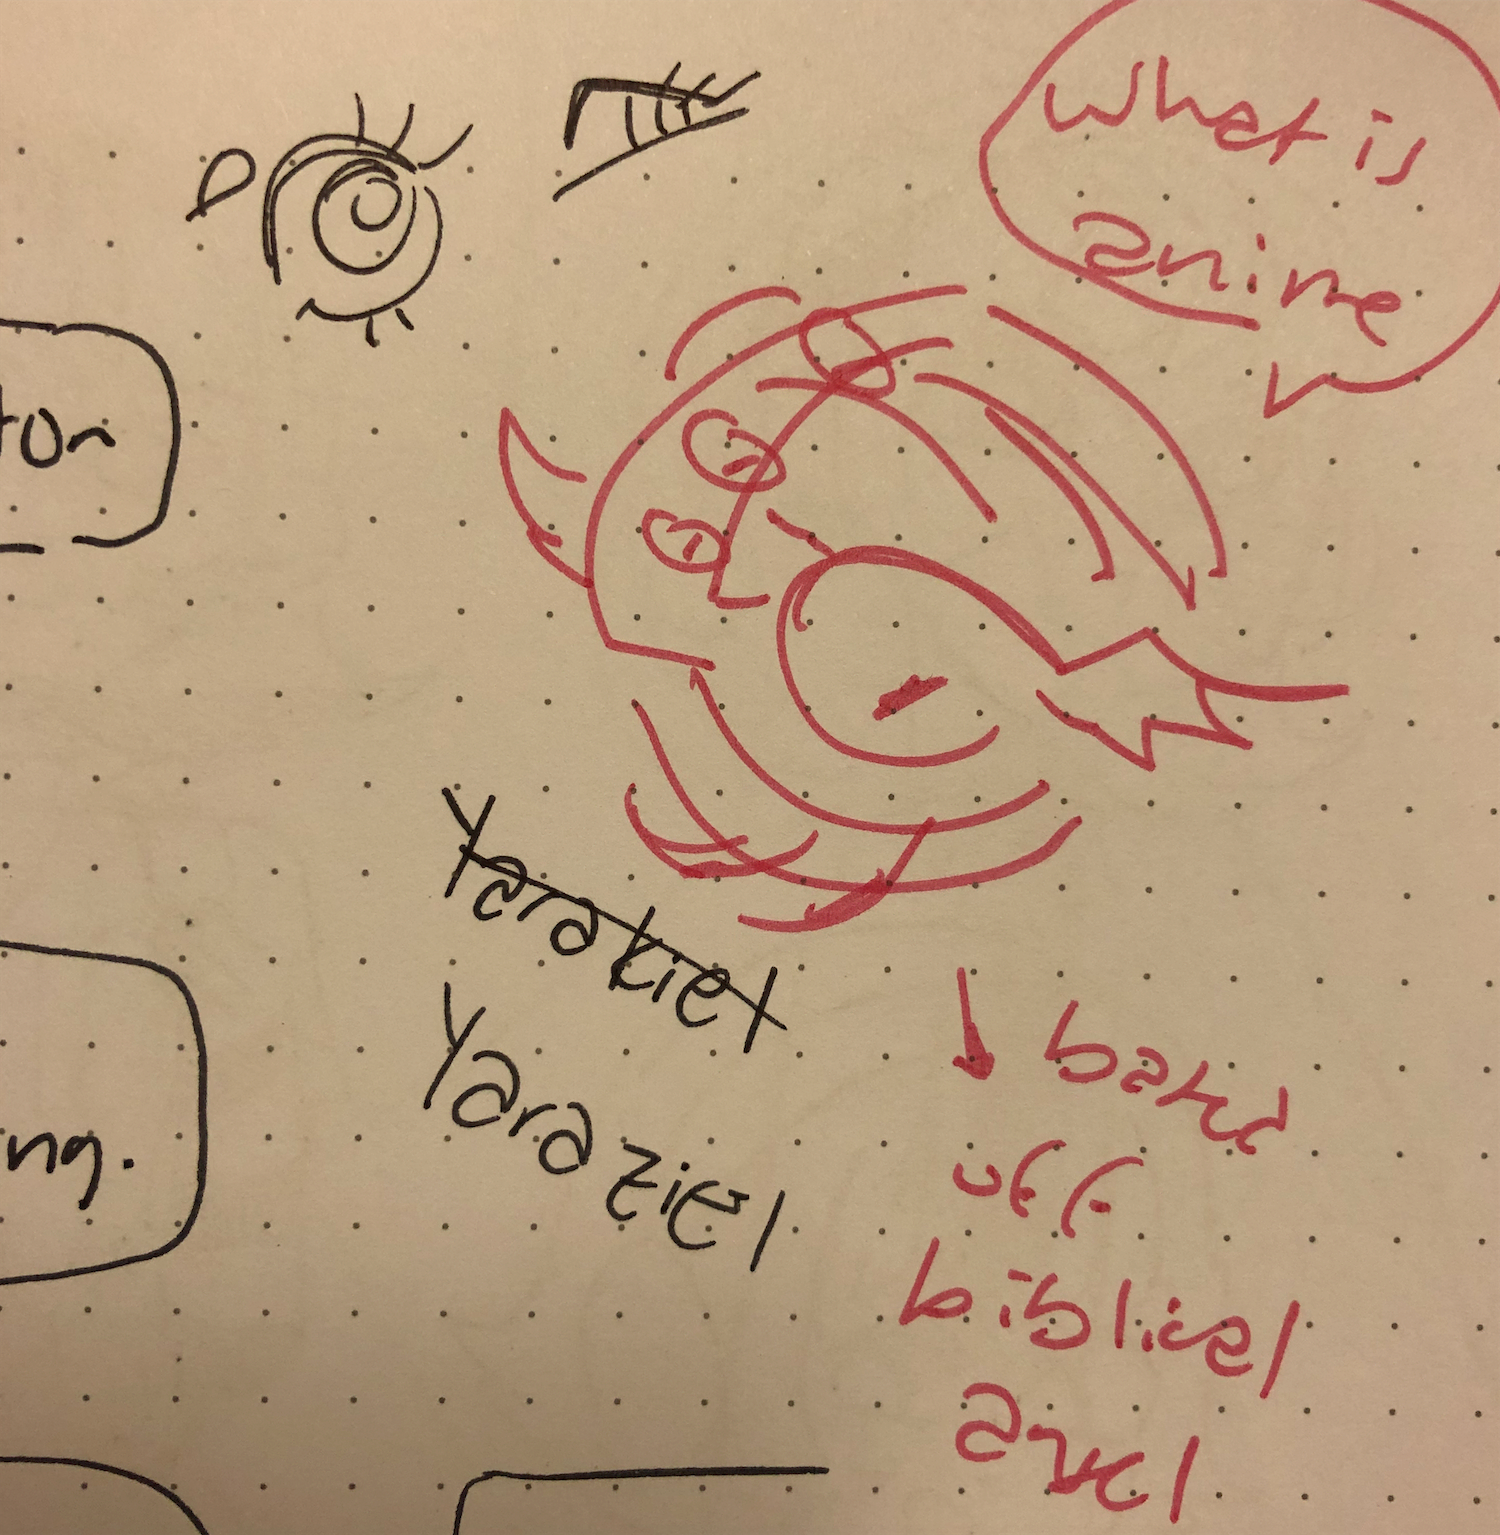 These are sketches to plan out the characters in McCanney Middle School Anime Club. This picture shows a sketch for an early design of Yaraziel, along with some initial naming ideas. Yaraziel is drawn with a large circle around him with many eyes.